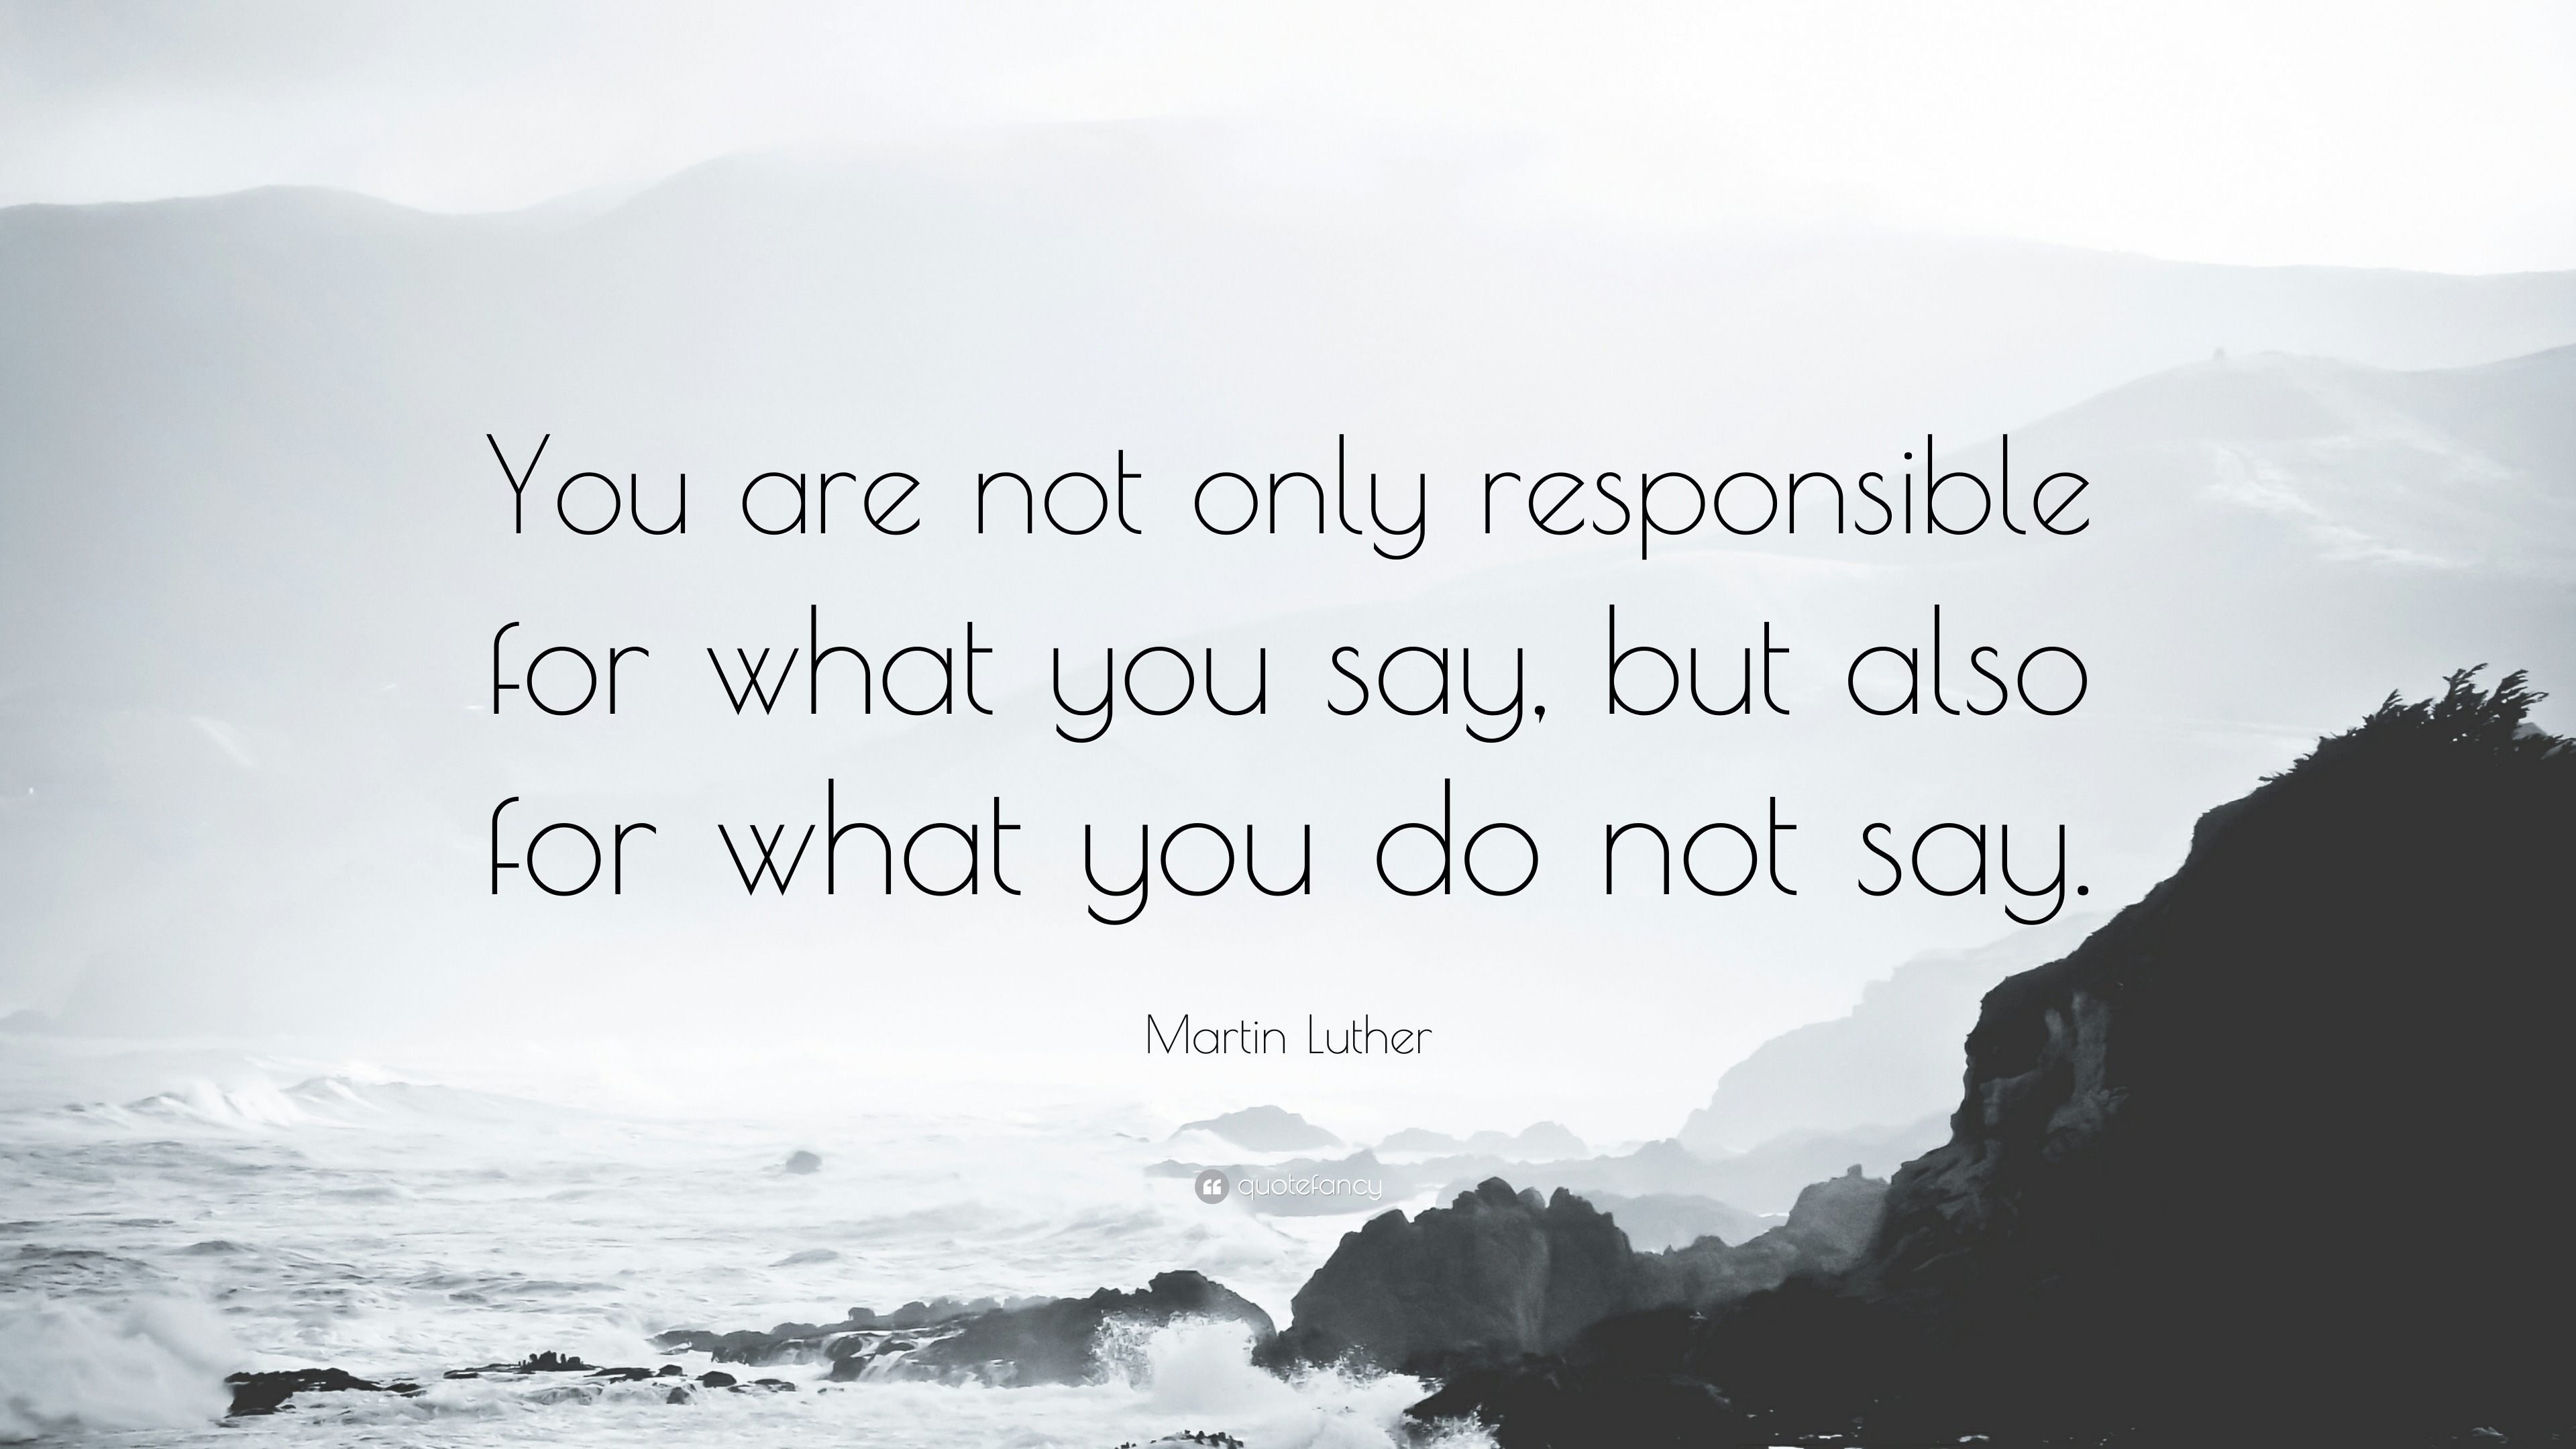 378258-Martin-Luther-Quote-You-are-not-only-responsible-for-what-you-say.jpg